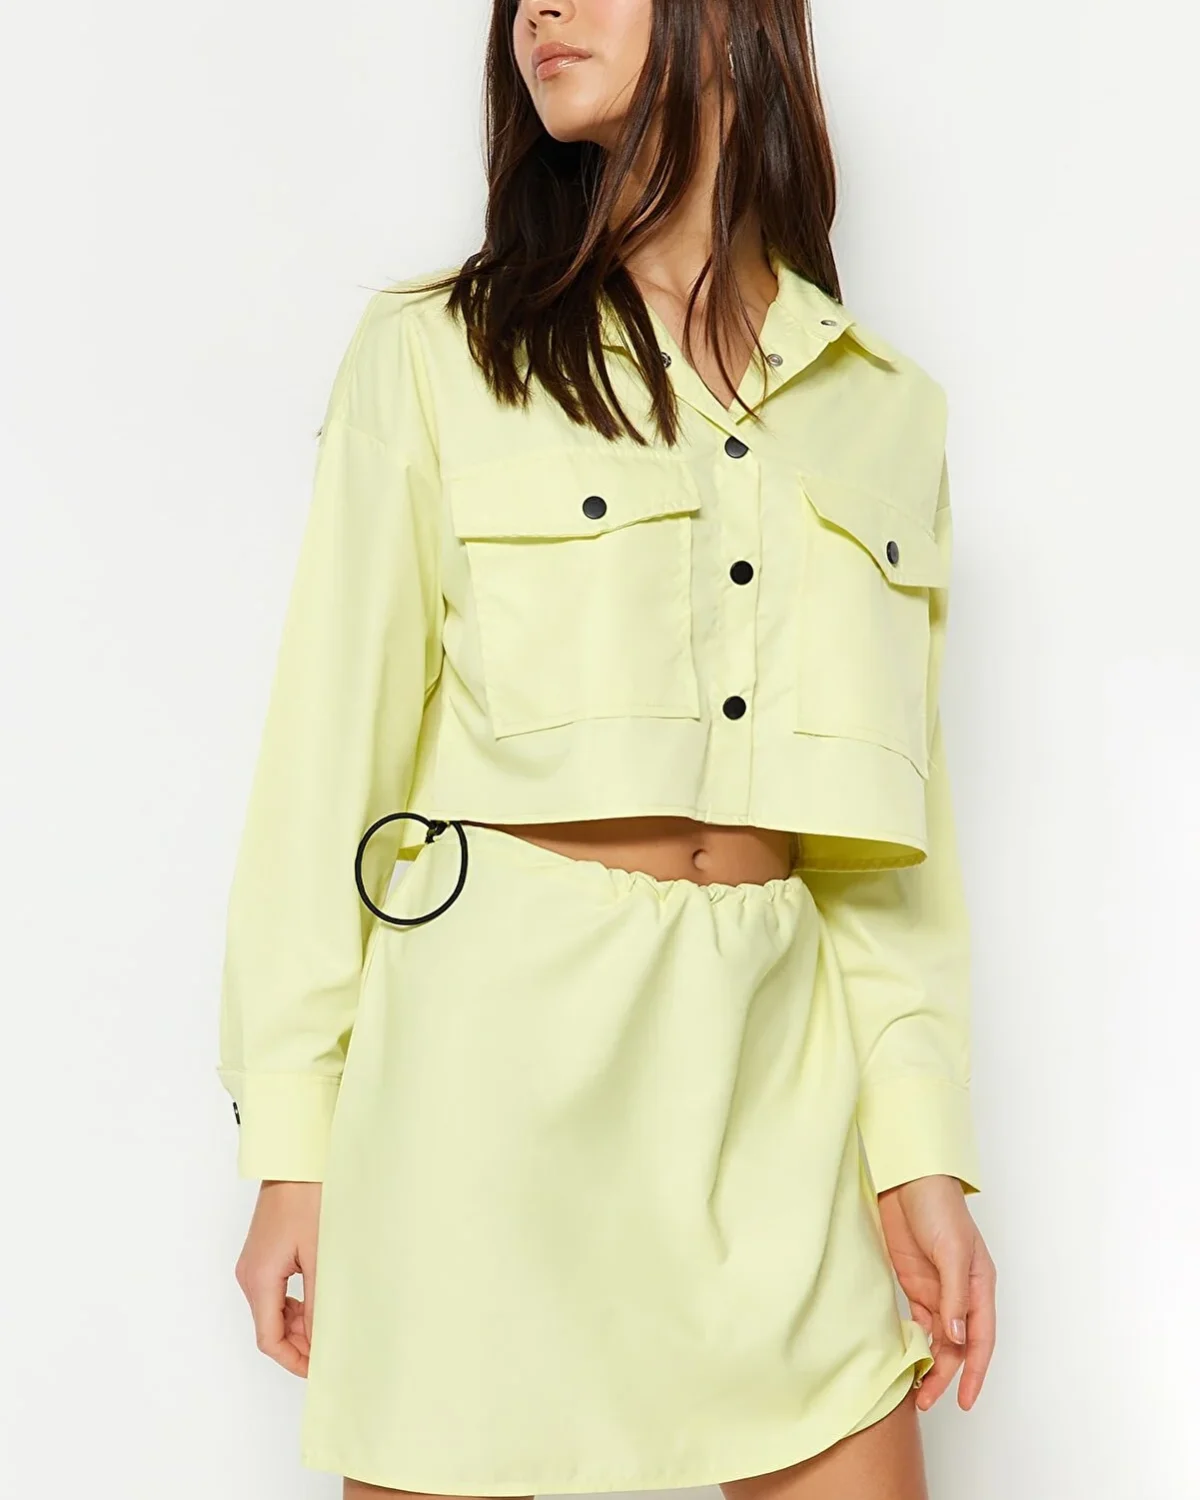 Trendyol Collection Yellow Skirt for Women by Picks for Less